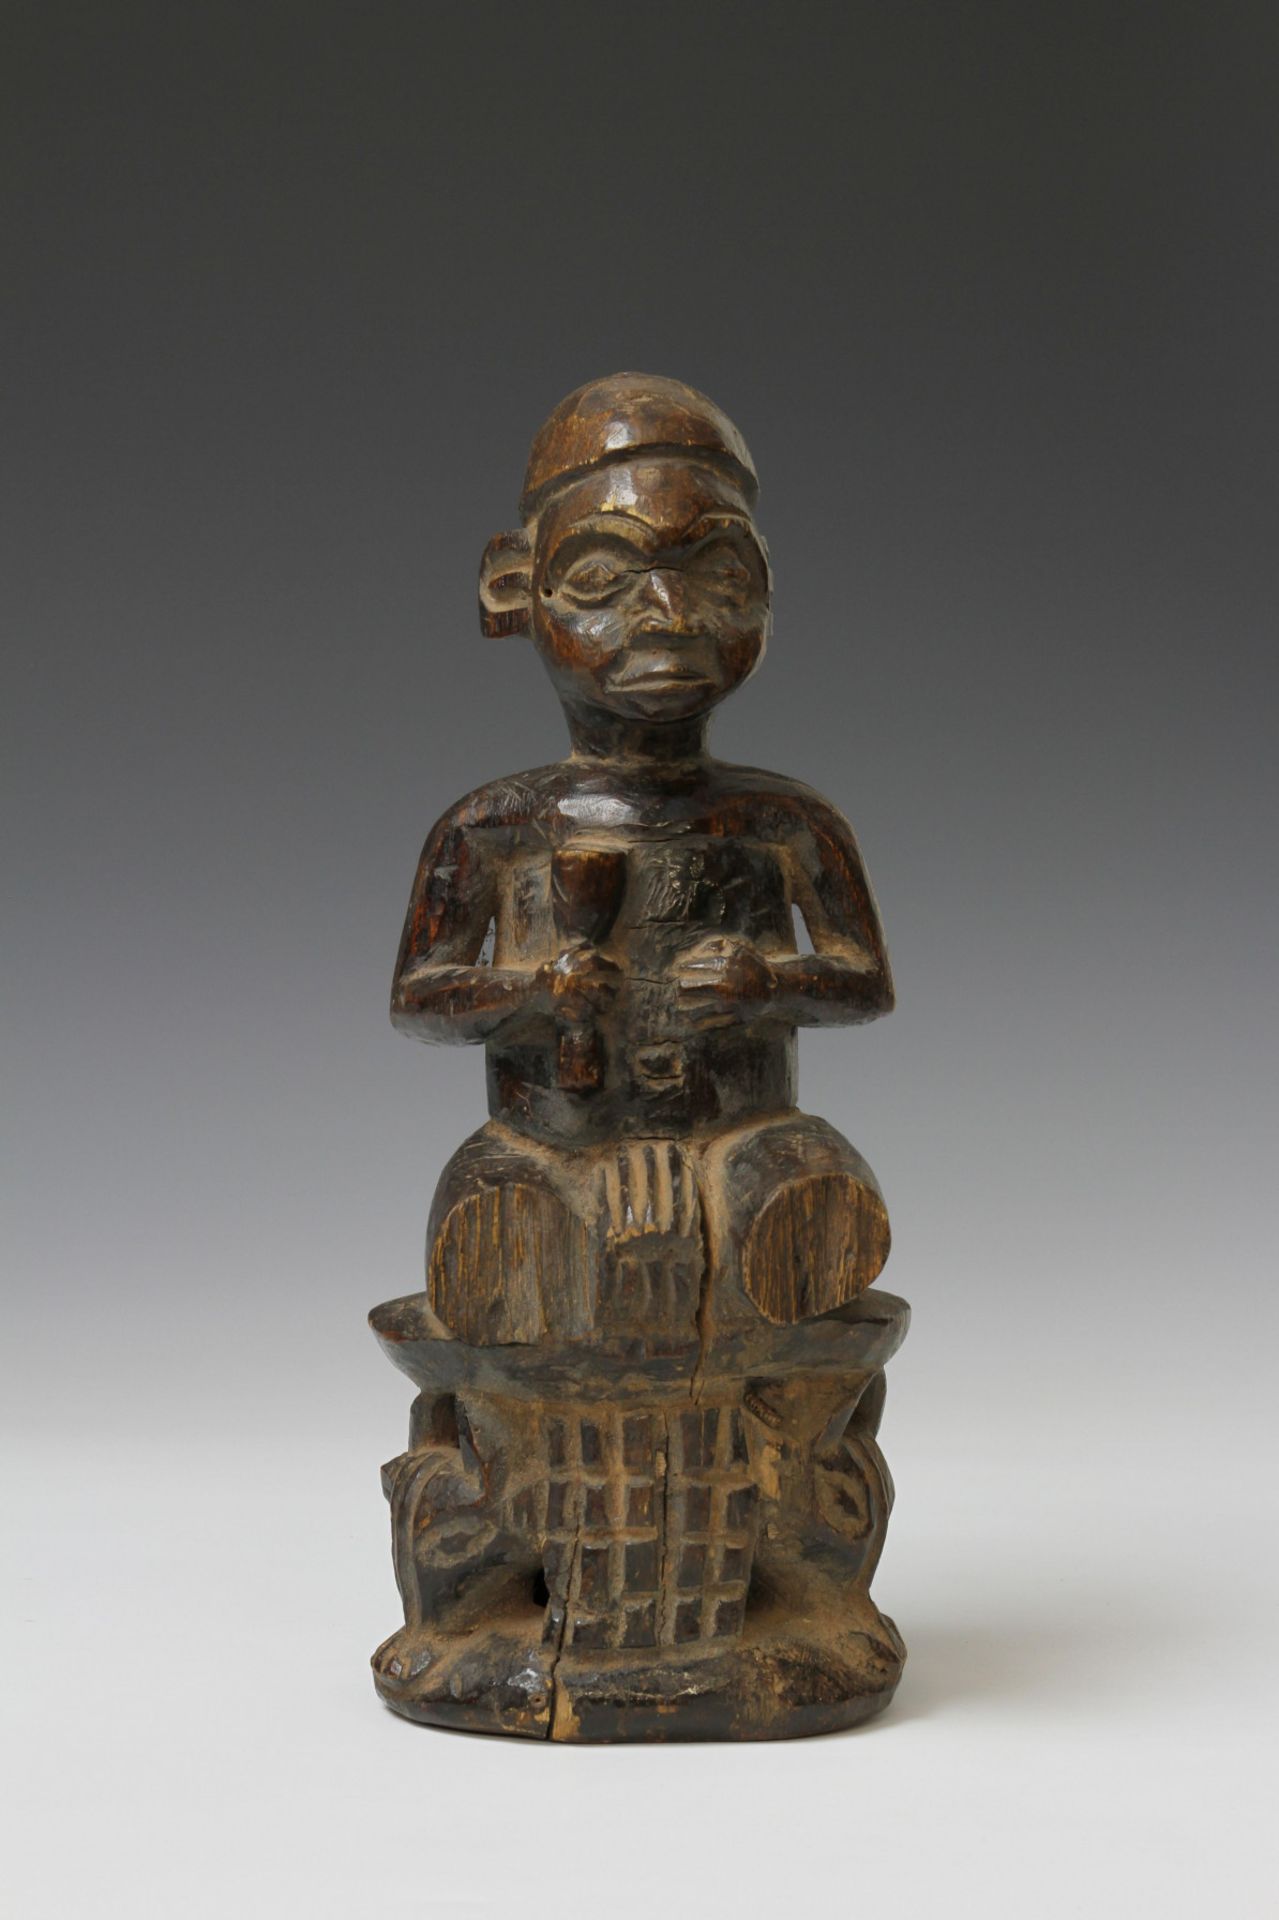 Cameroon, Grass lands, seated figure on a throne with buffalo heads